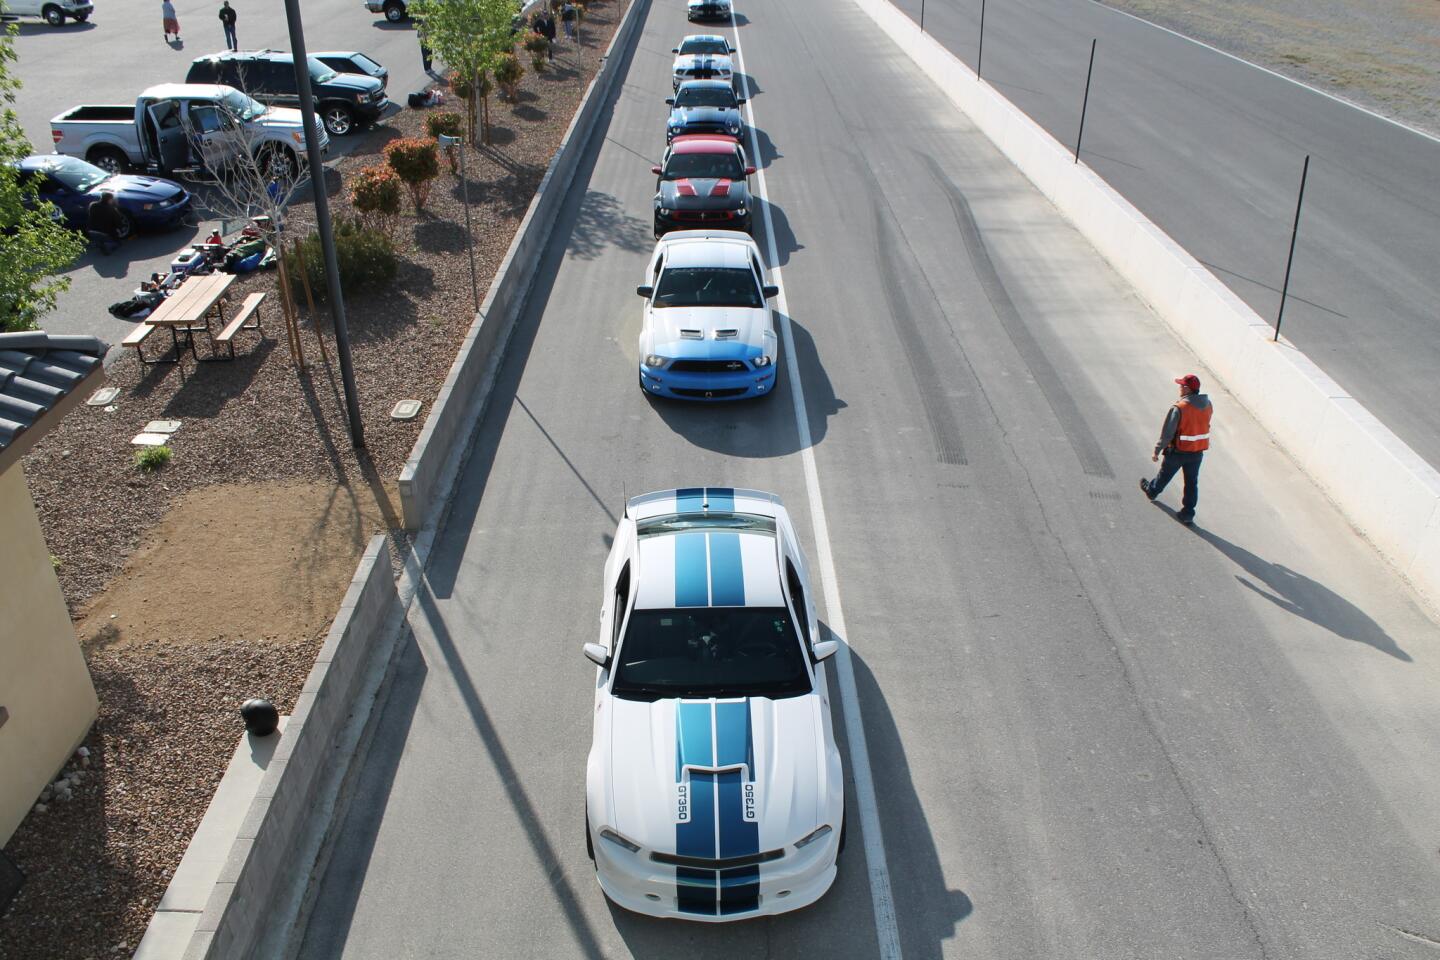 Attendees to the 6th annual Shelby Bash lineup for track time at Spring Mountain Motorsports Ranch in Pahrump, NV.